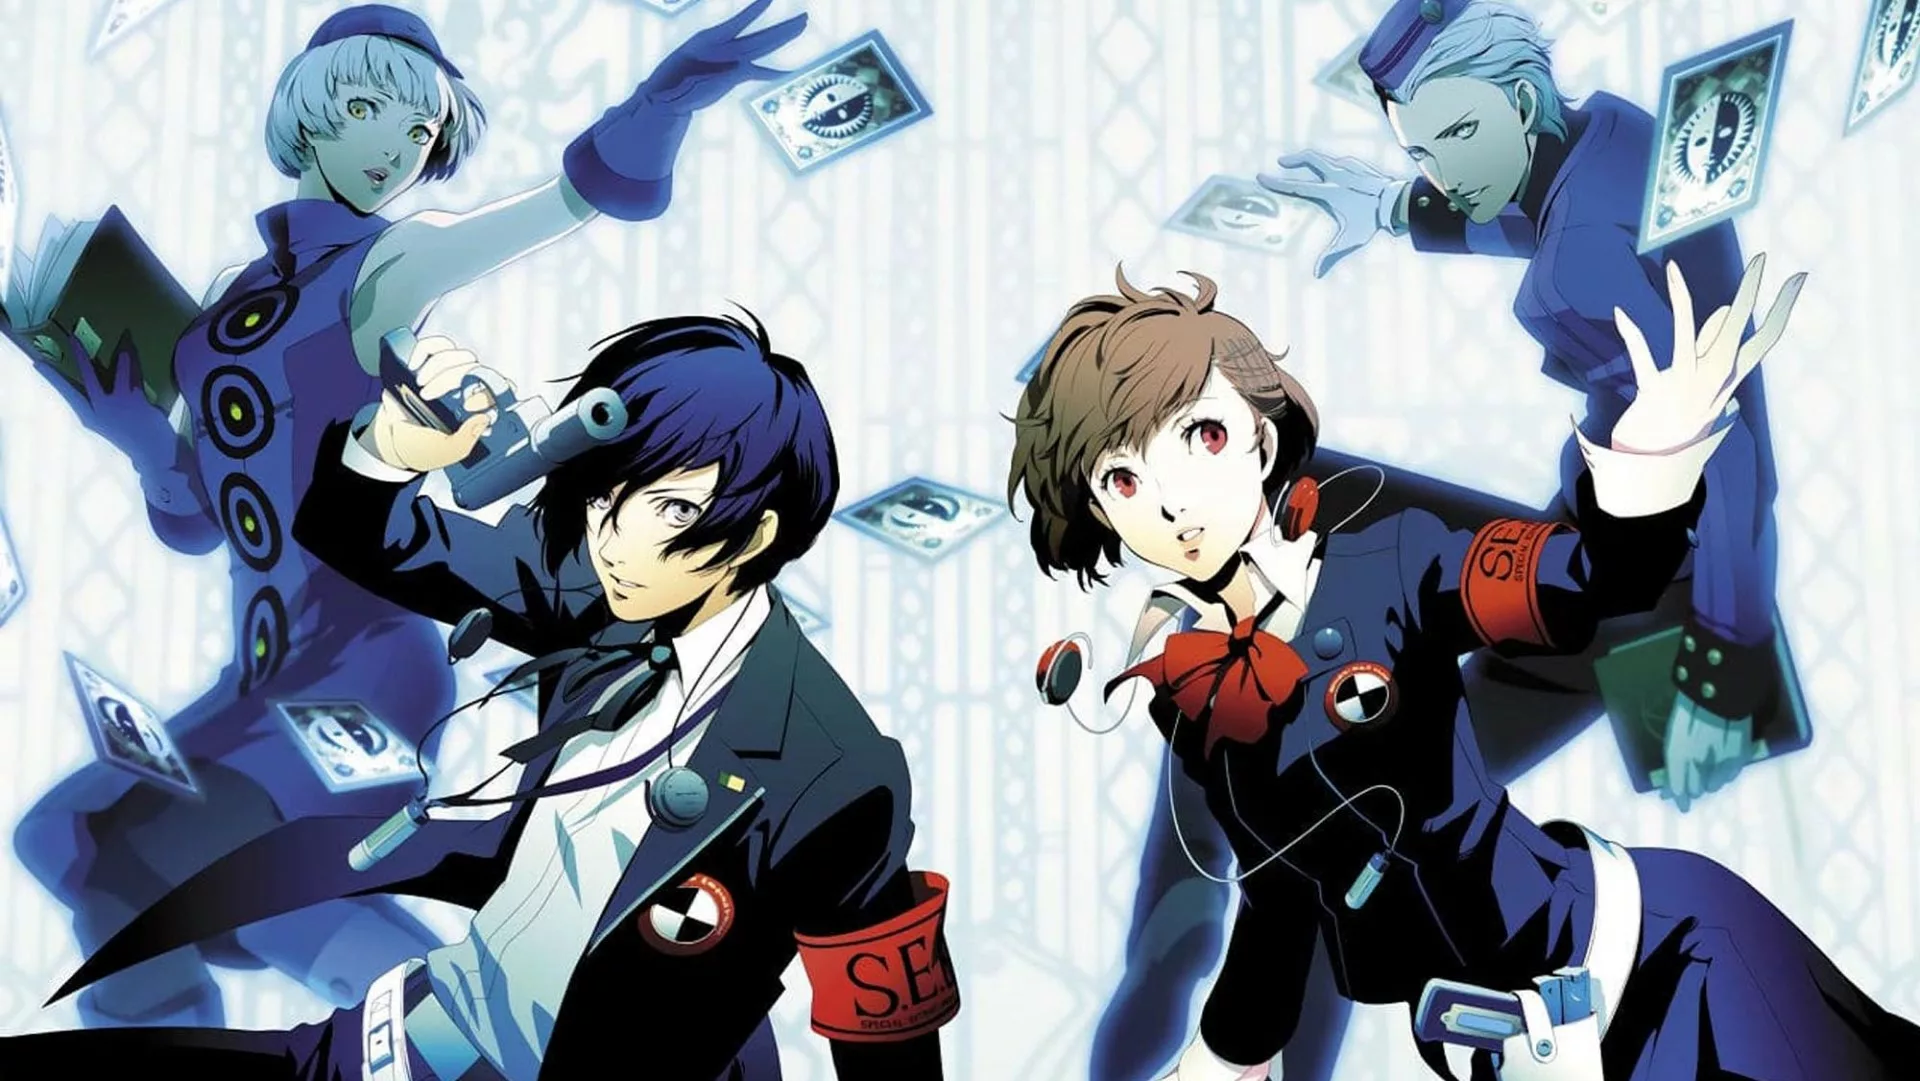 Persona 3 Remake in Development? Expect the Announcement This Summer